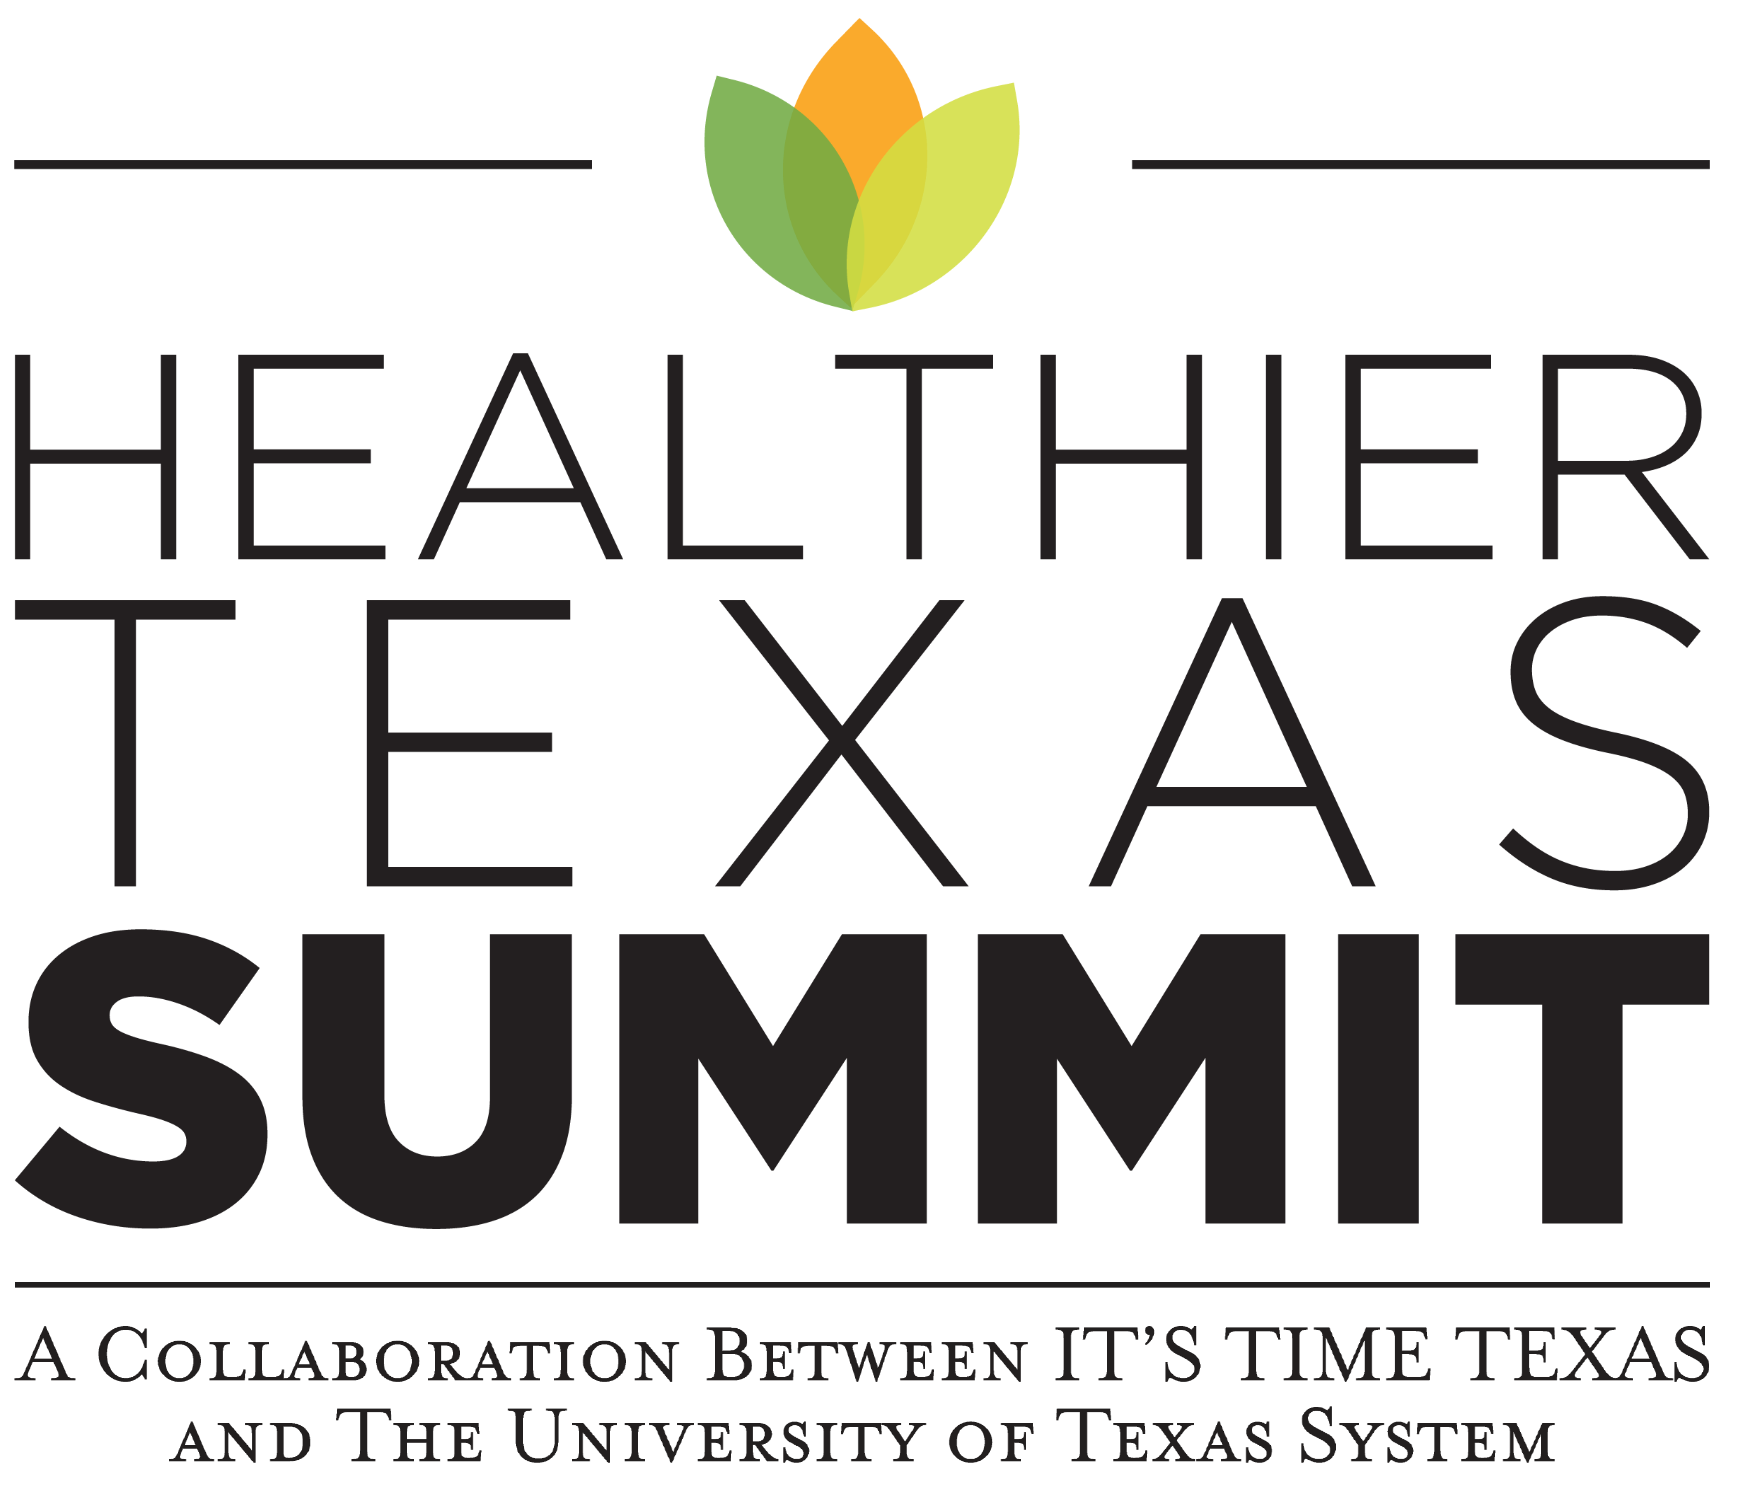 Healthier Texas Summit: A Collaboration Between IT'S TIME TEXAS and The University of Texas System